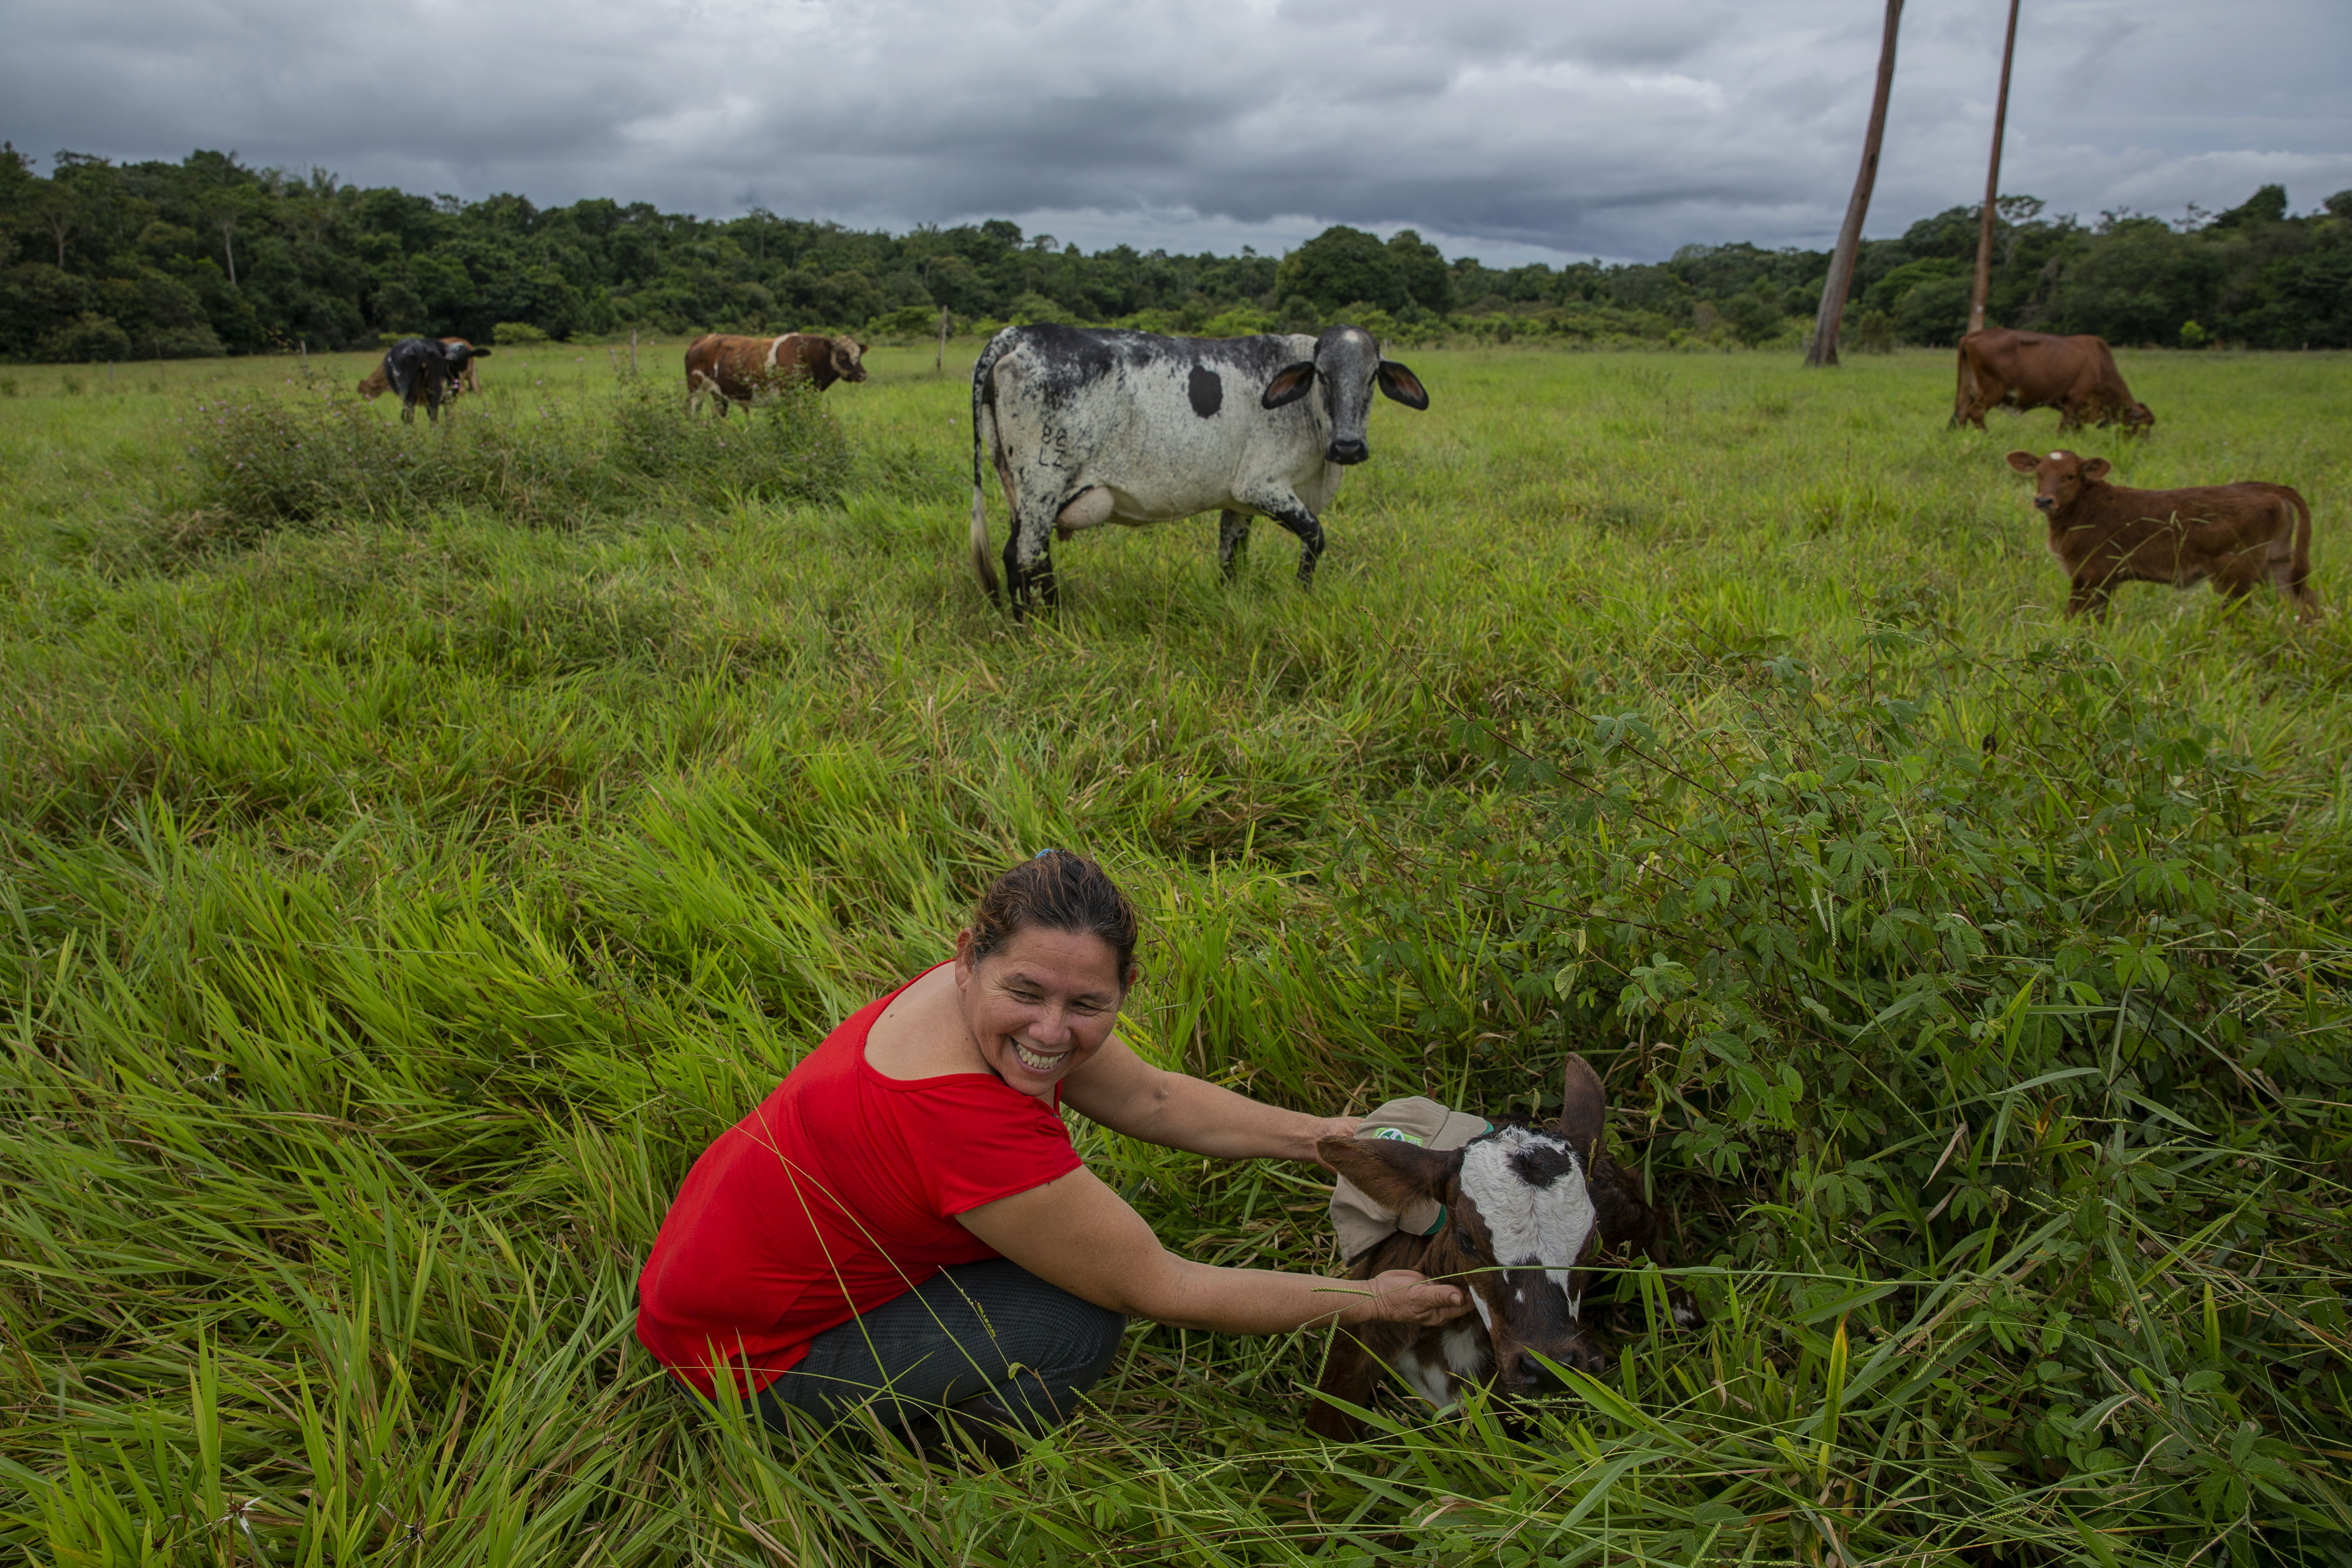 Mercedes Murillo Gutierrez attends to cows on her farm in Meta, Colombia